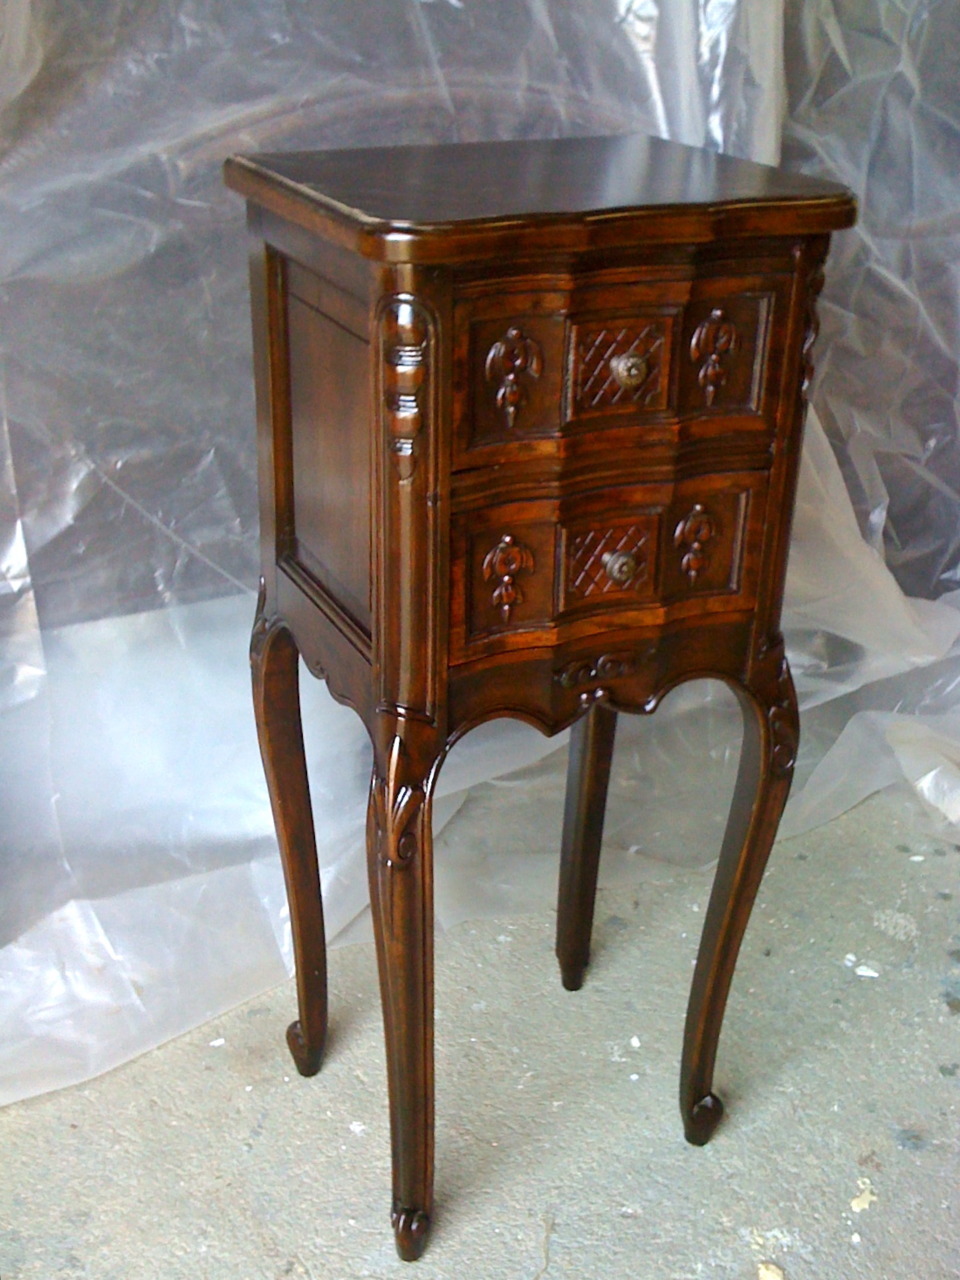 This antique side table was purchased by its owner during a trip to NY 